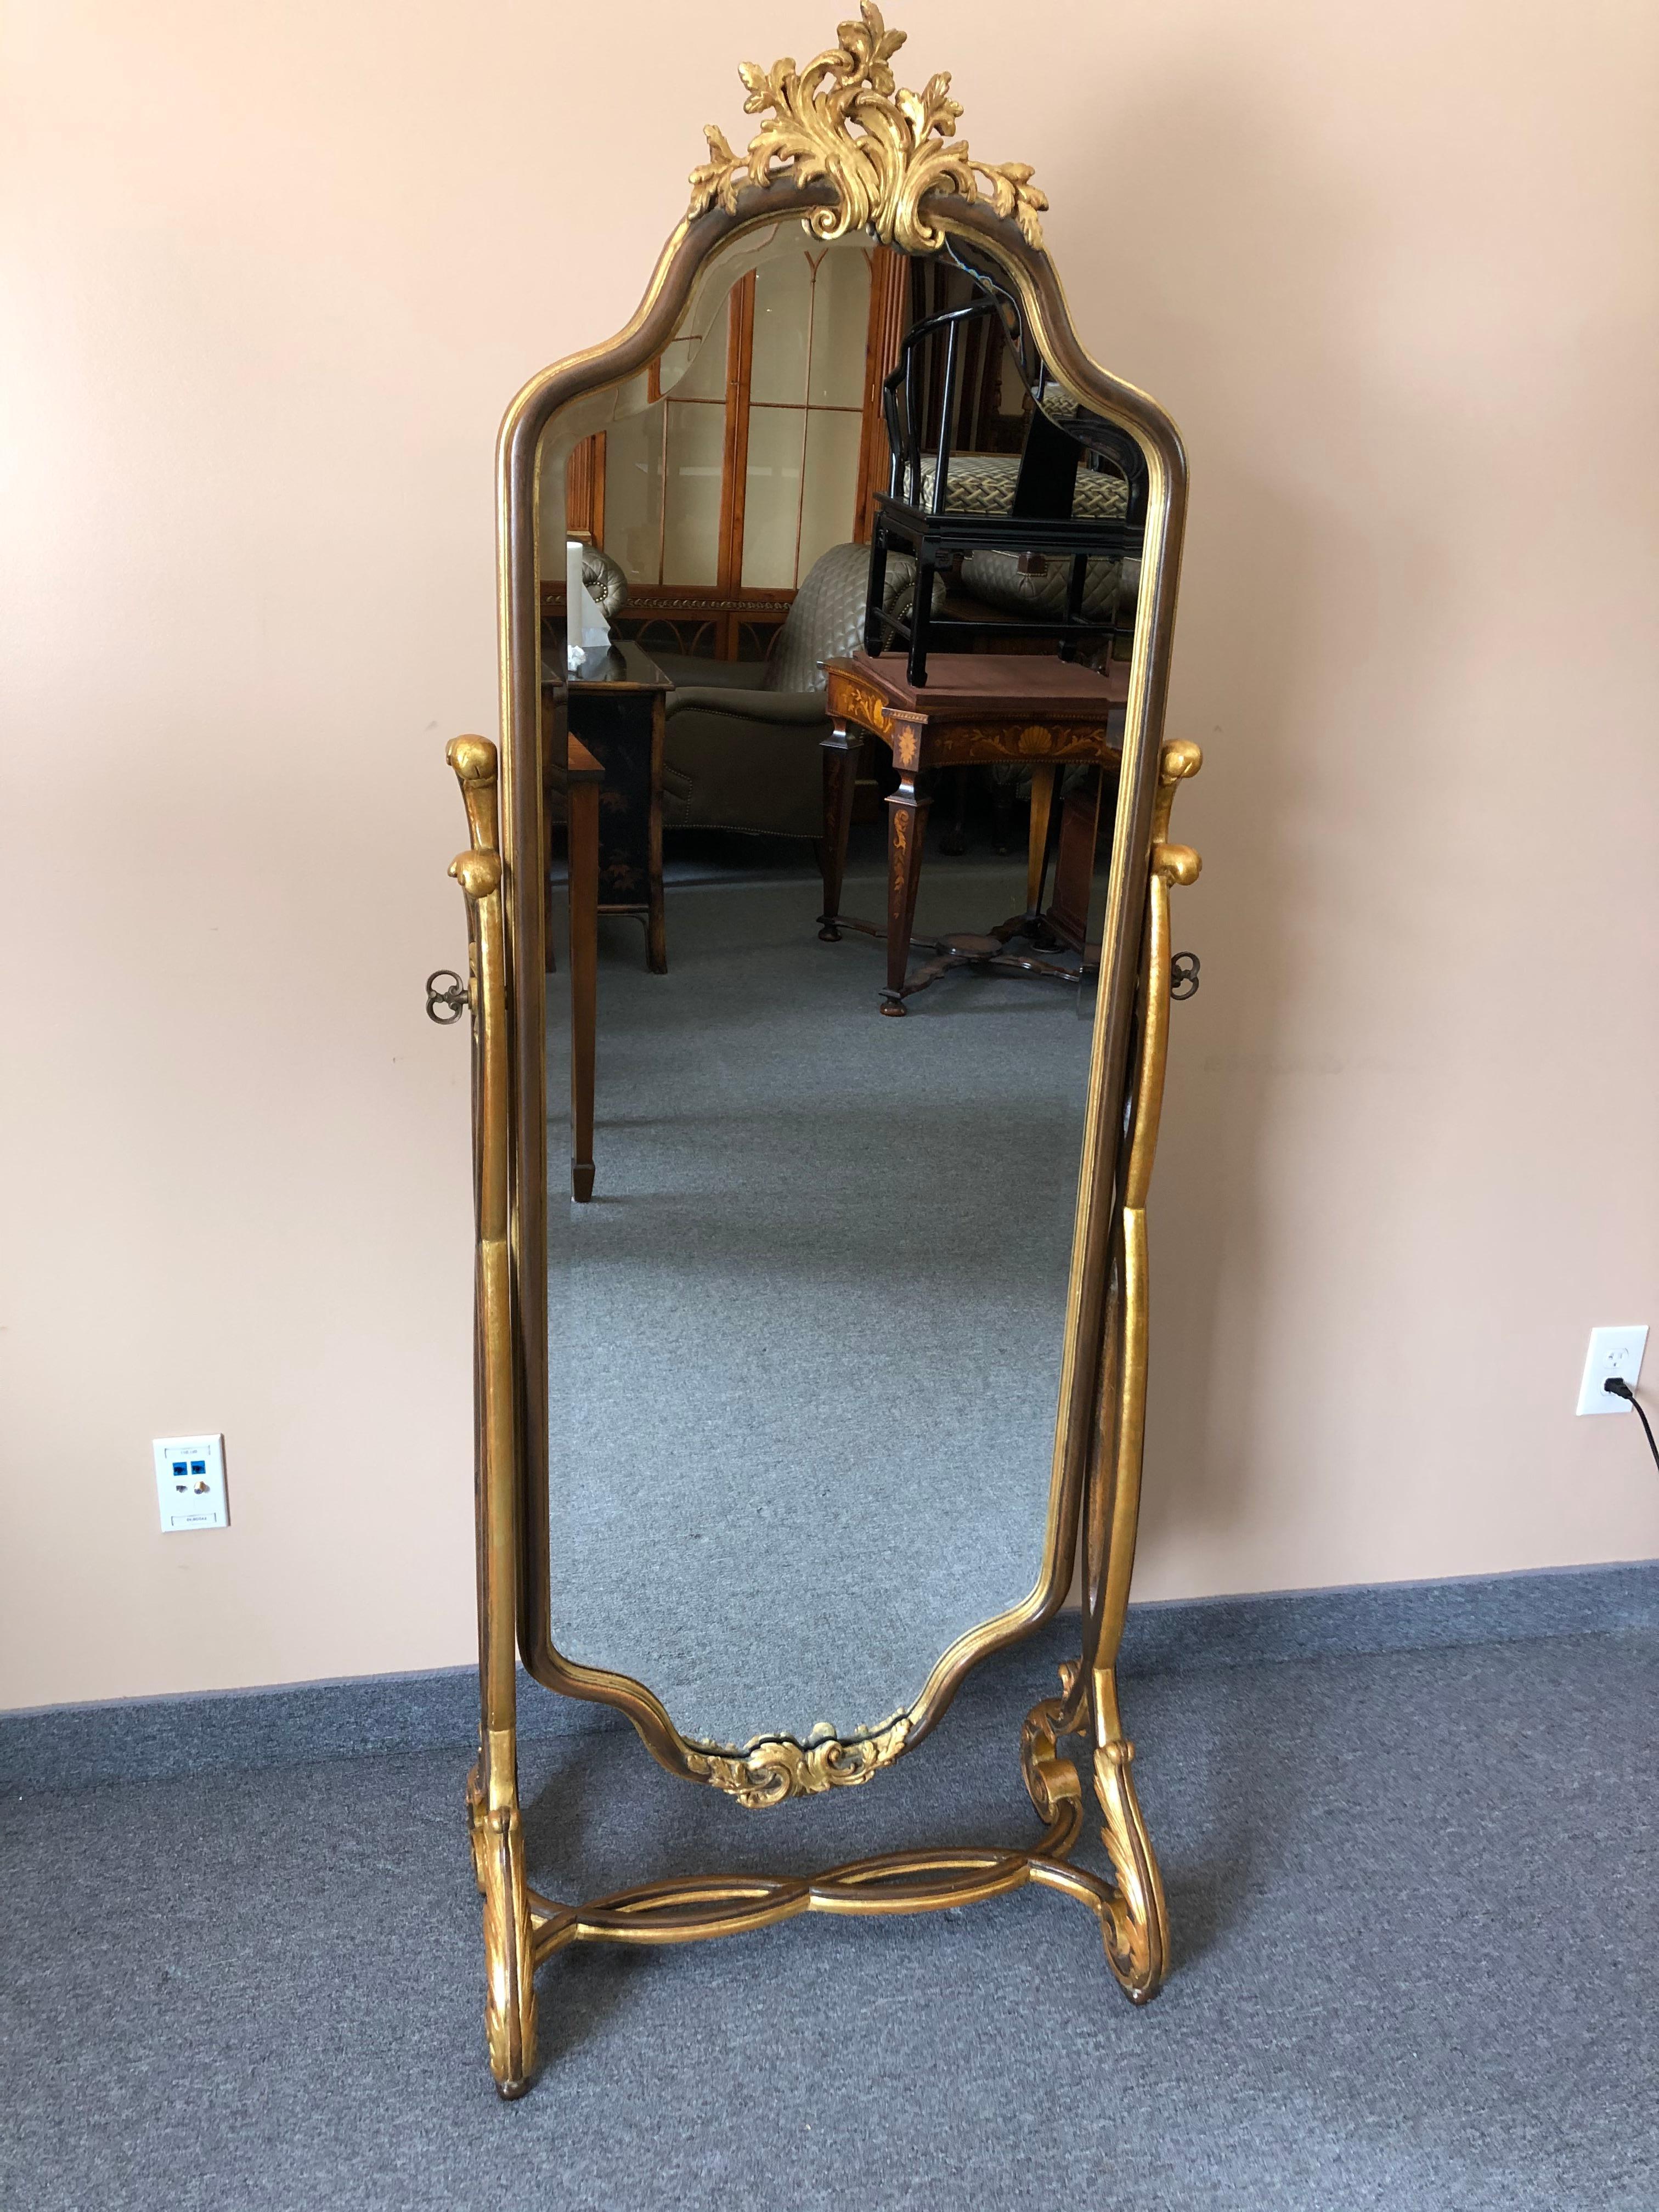 Glamorous standing full length Cheval mirror having gilt decorated wood frame and base, pretty acanthus leaf adornments, beautiful flourish at the top and scalloped shape, as well as a heavy beveled mirror.
Measures: Mirror is 20 W x 55 H.